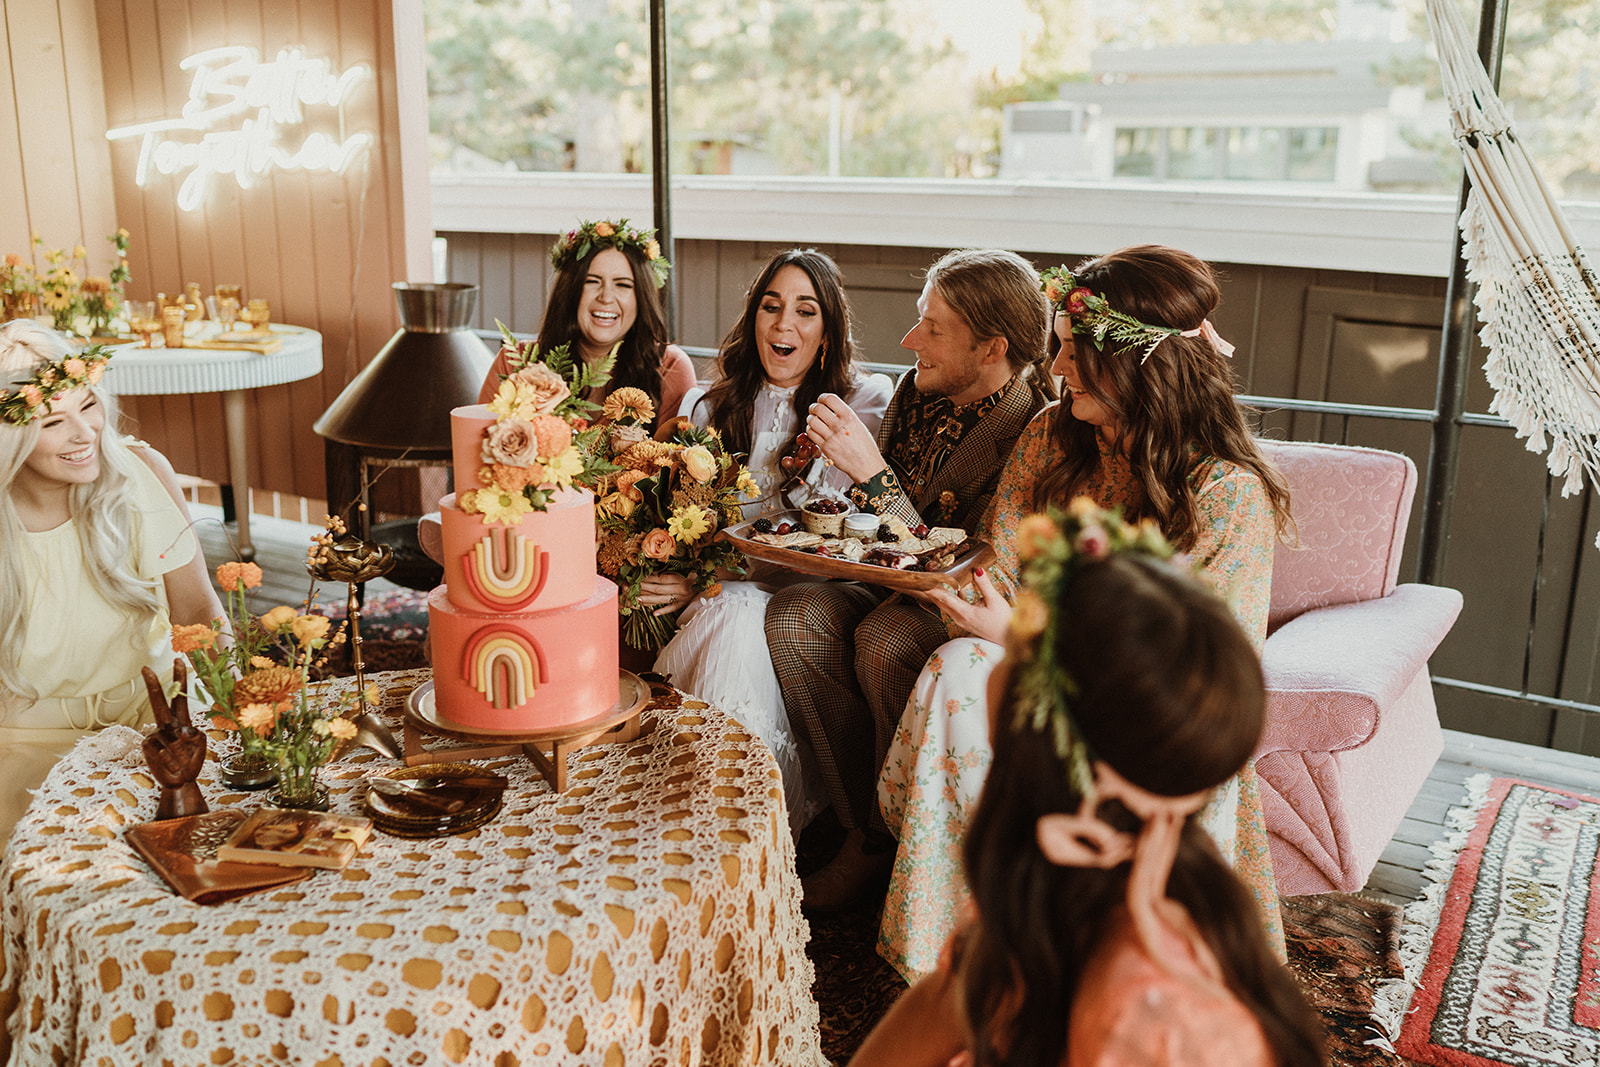 70's inspired wedding party shares food and cake on a retro wedding day